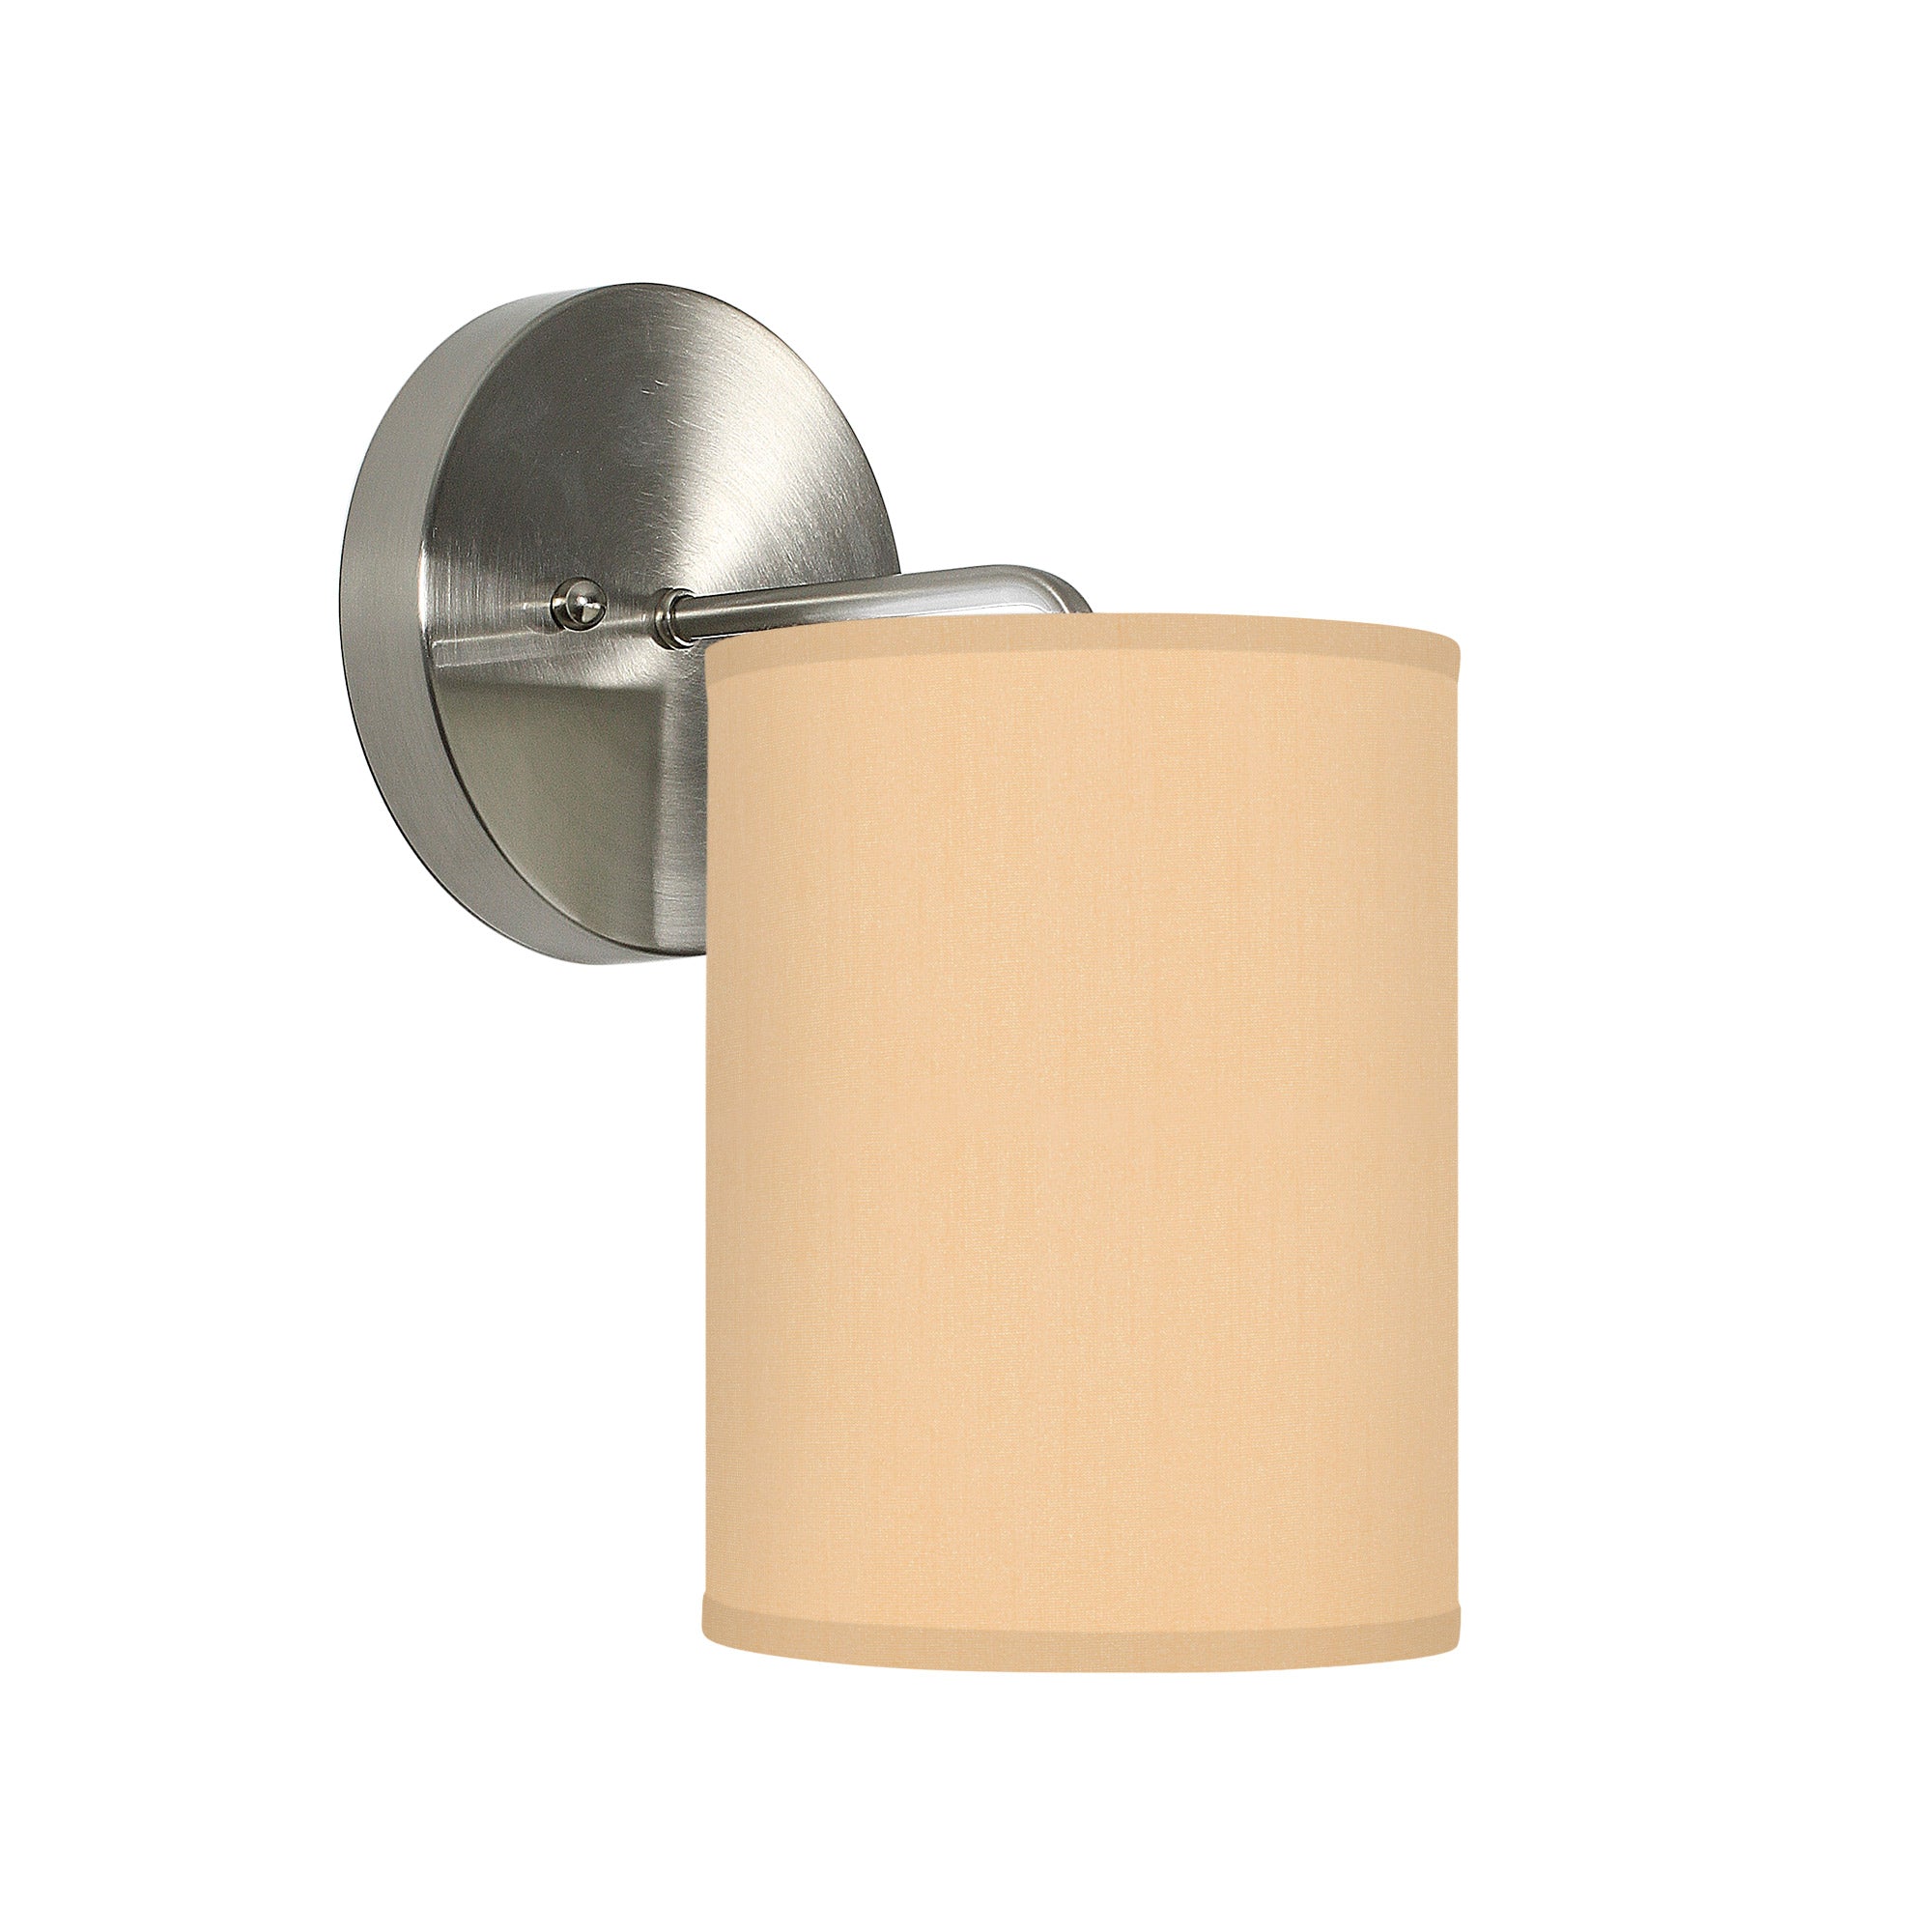 The Blair Wall Sconce from Seascape Fixtures in silk, champagne color.